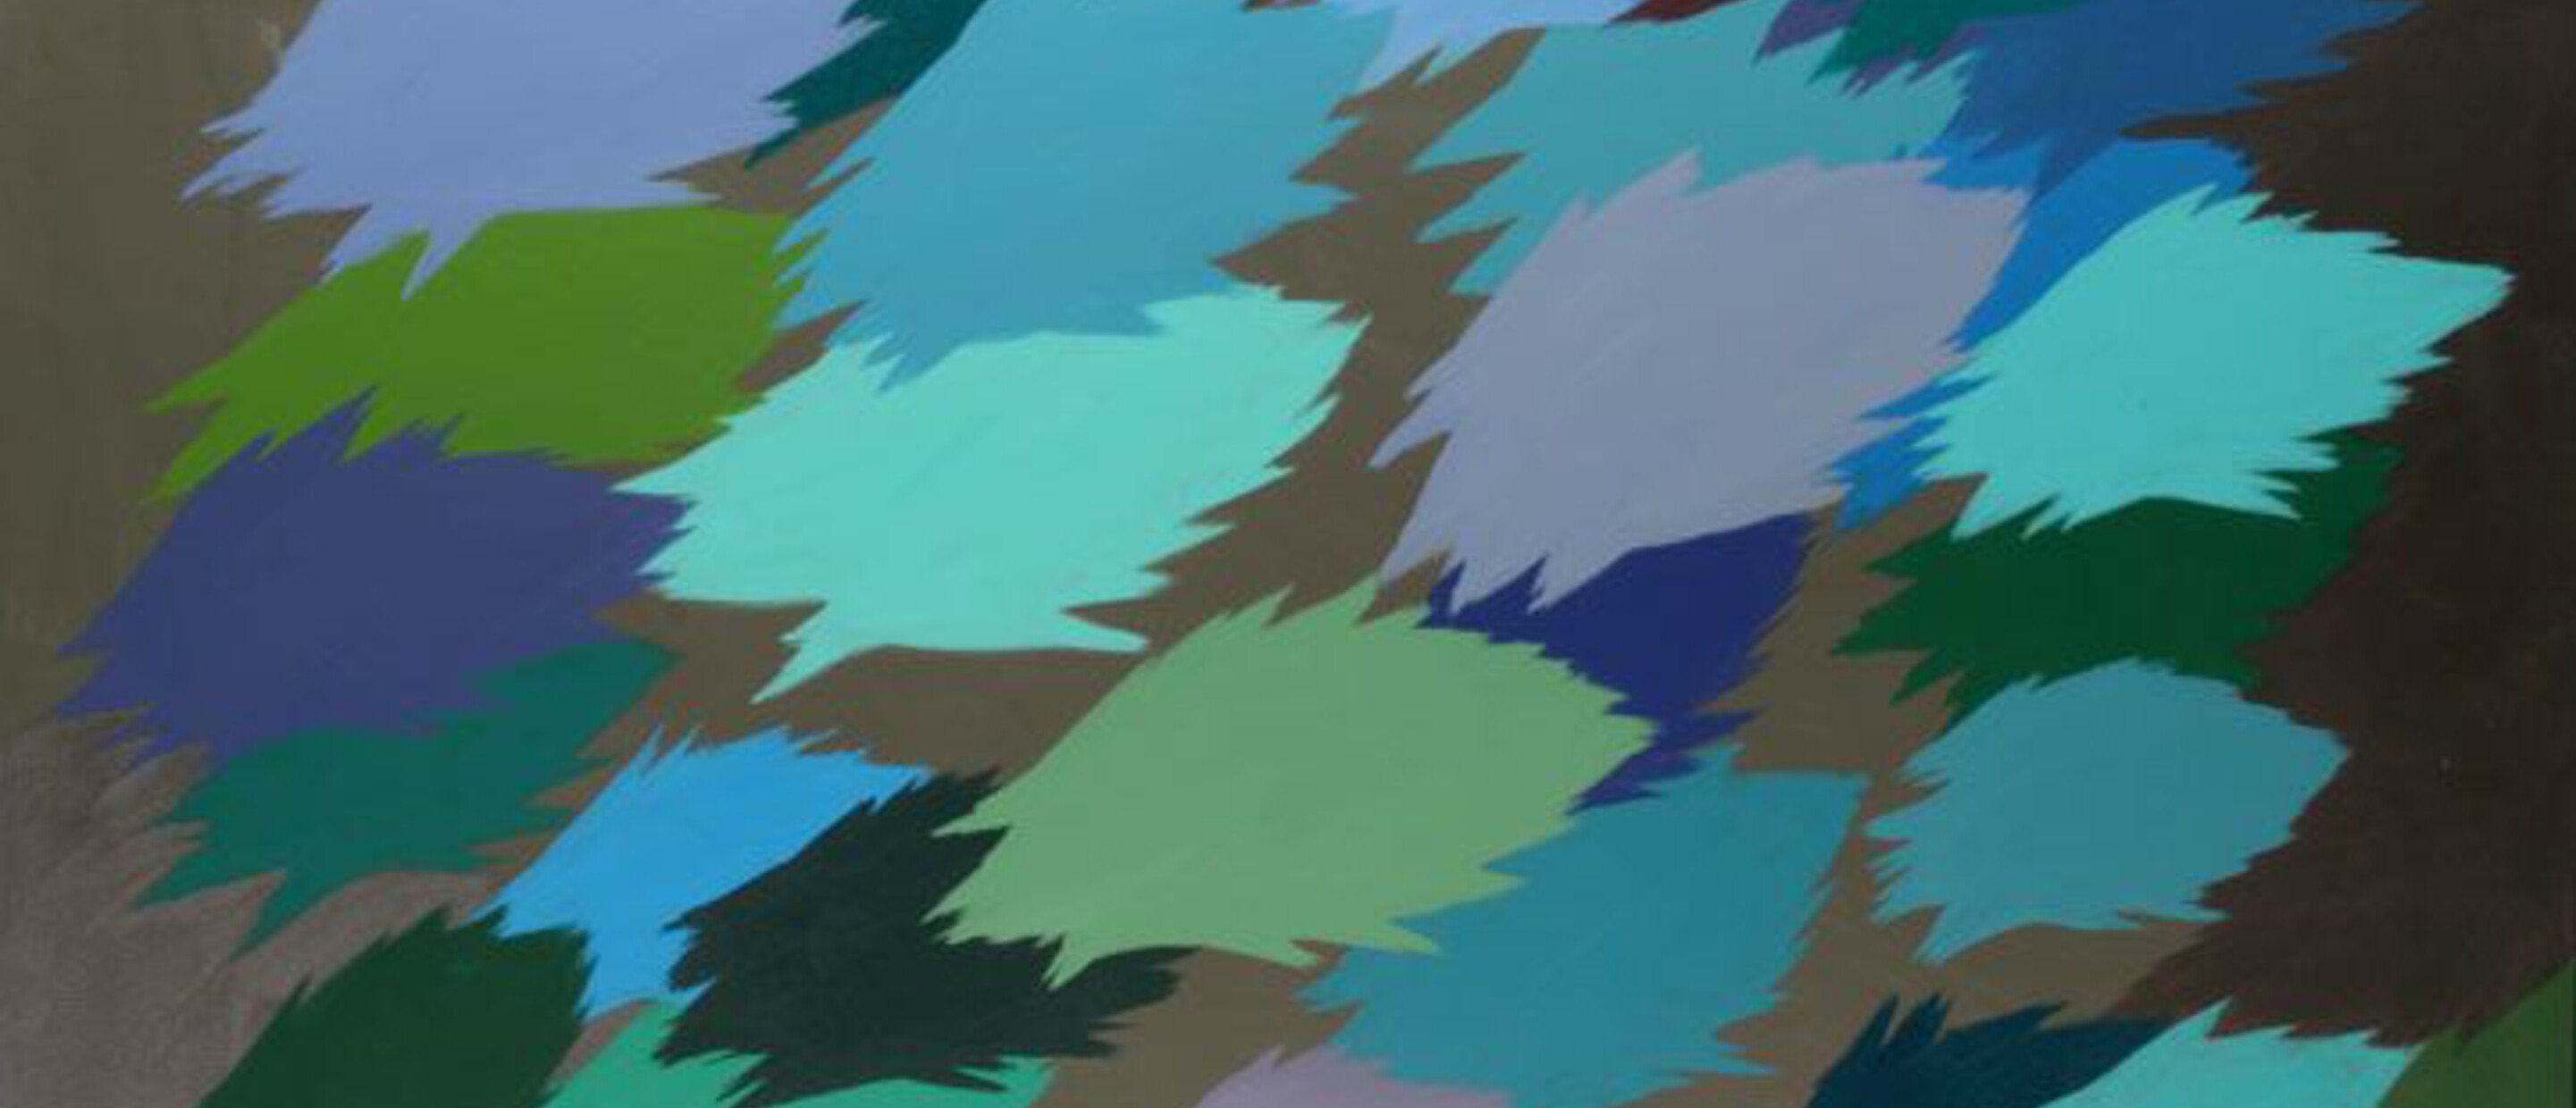 acrylic painting with greens and blues and purples in pattern of ruffled shapes